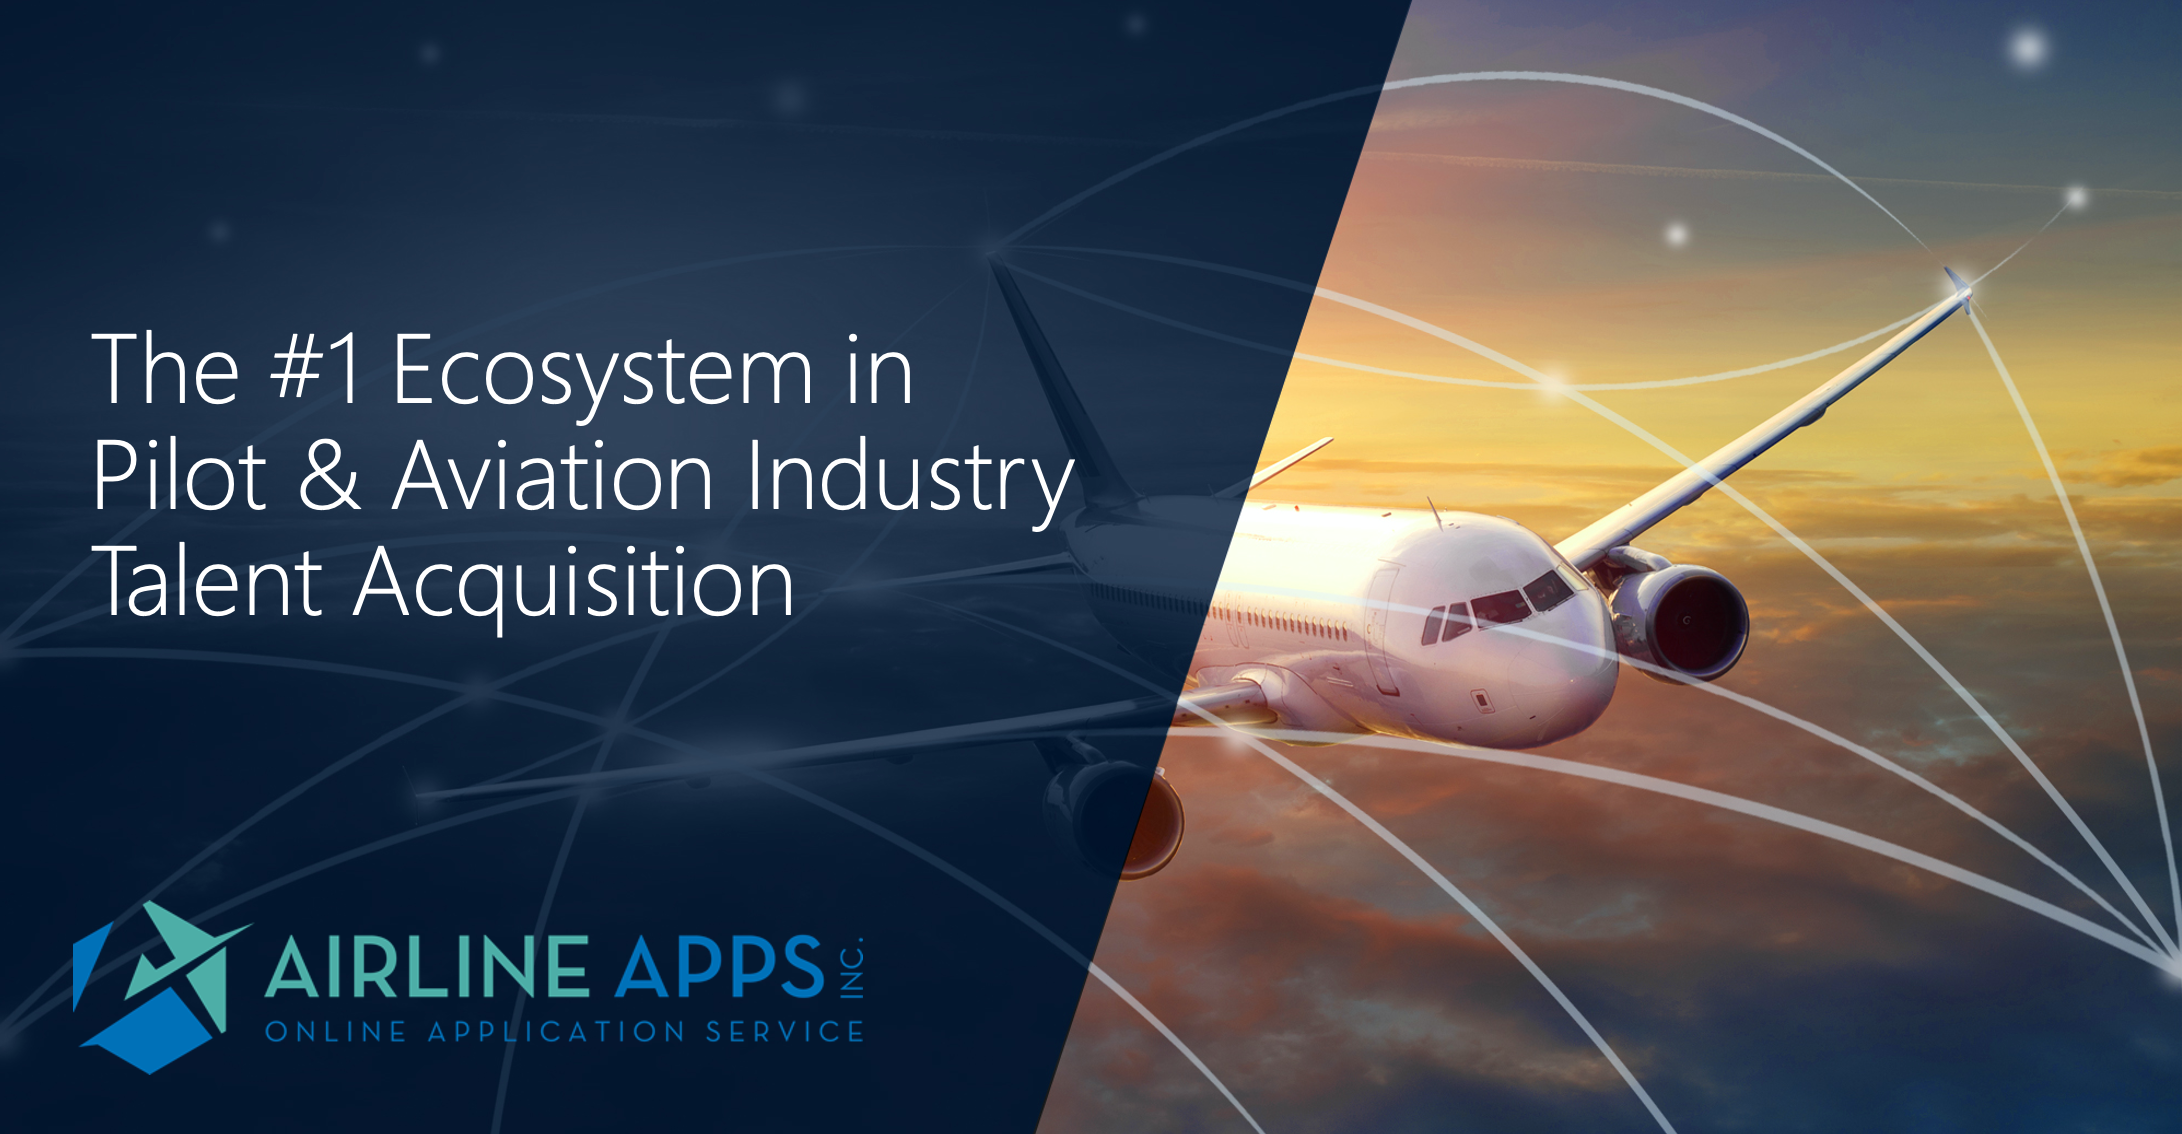 Airline Apps - Pilot Documents Are Now Live!